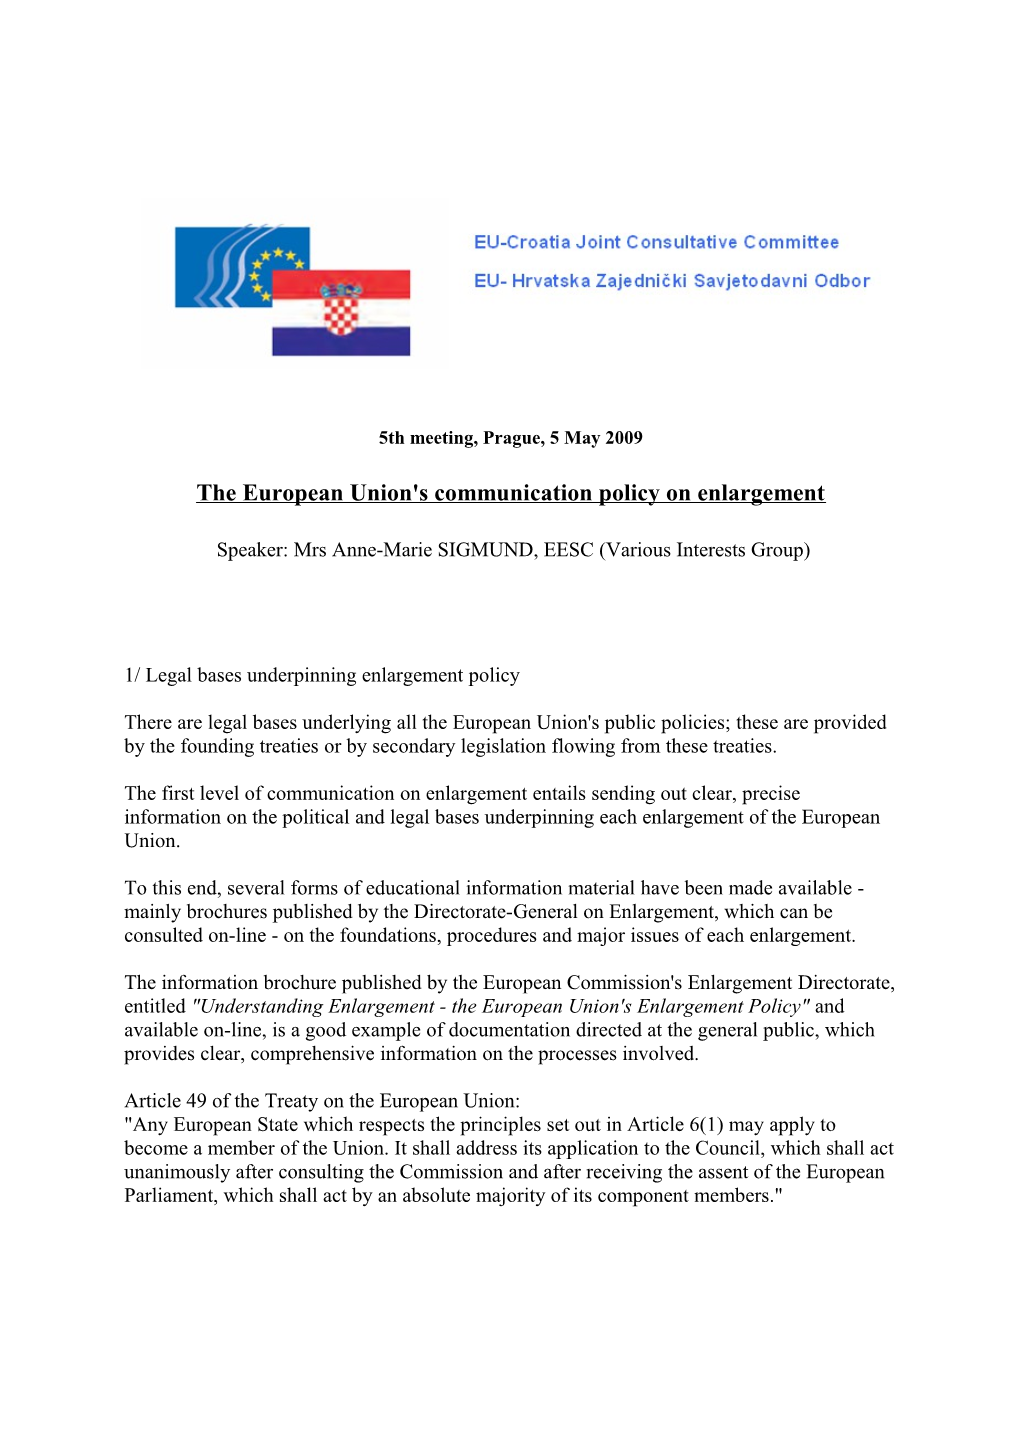 The European Union's Communication Policy on Enlargement